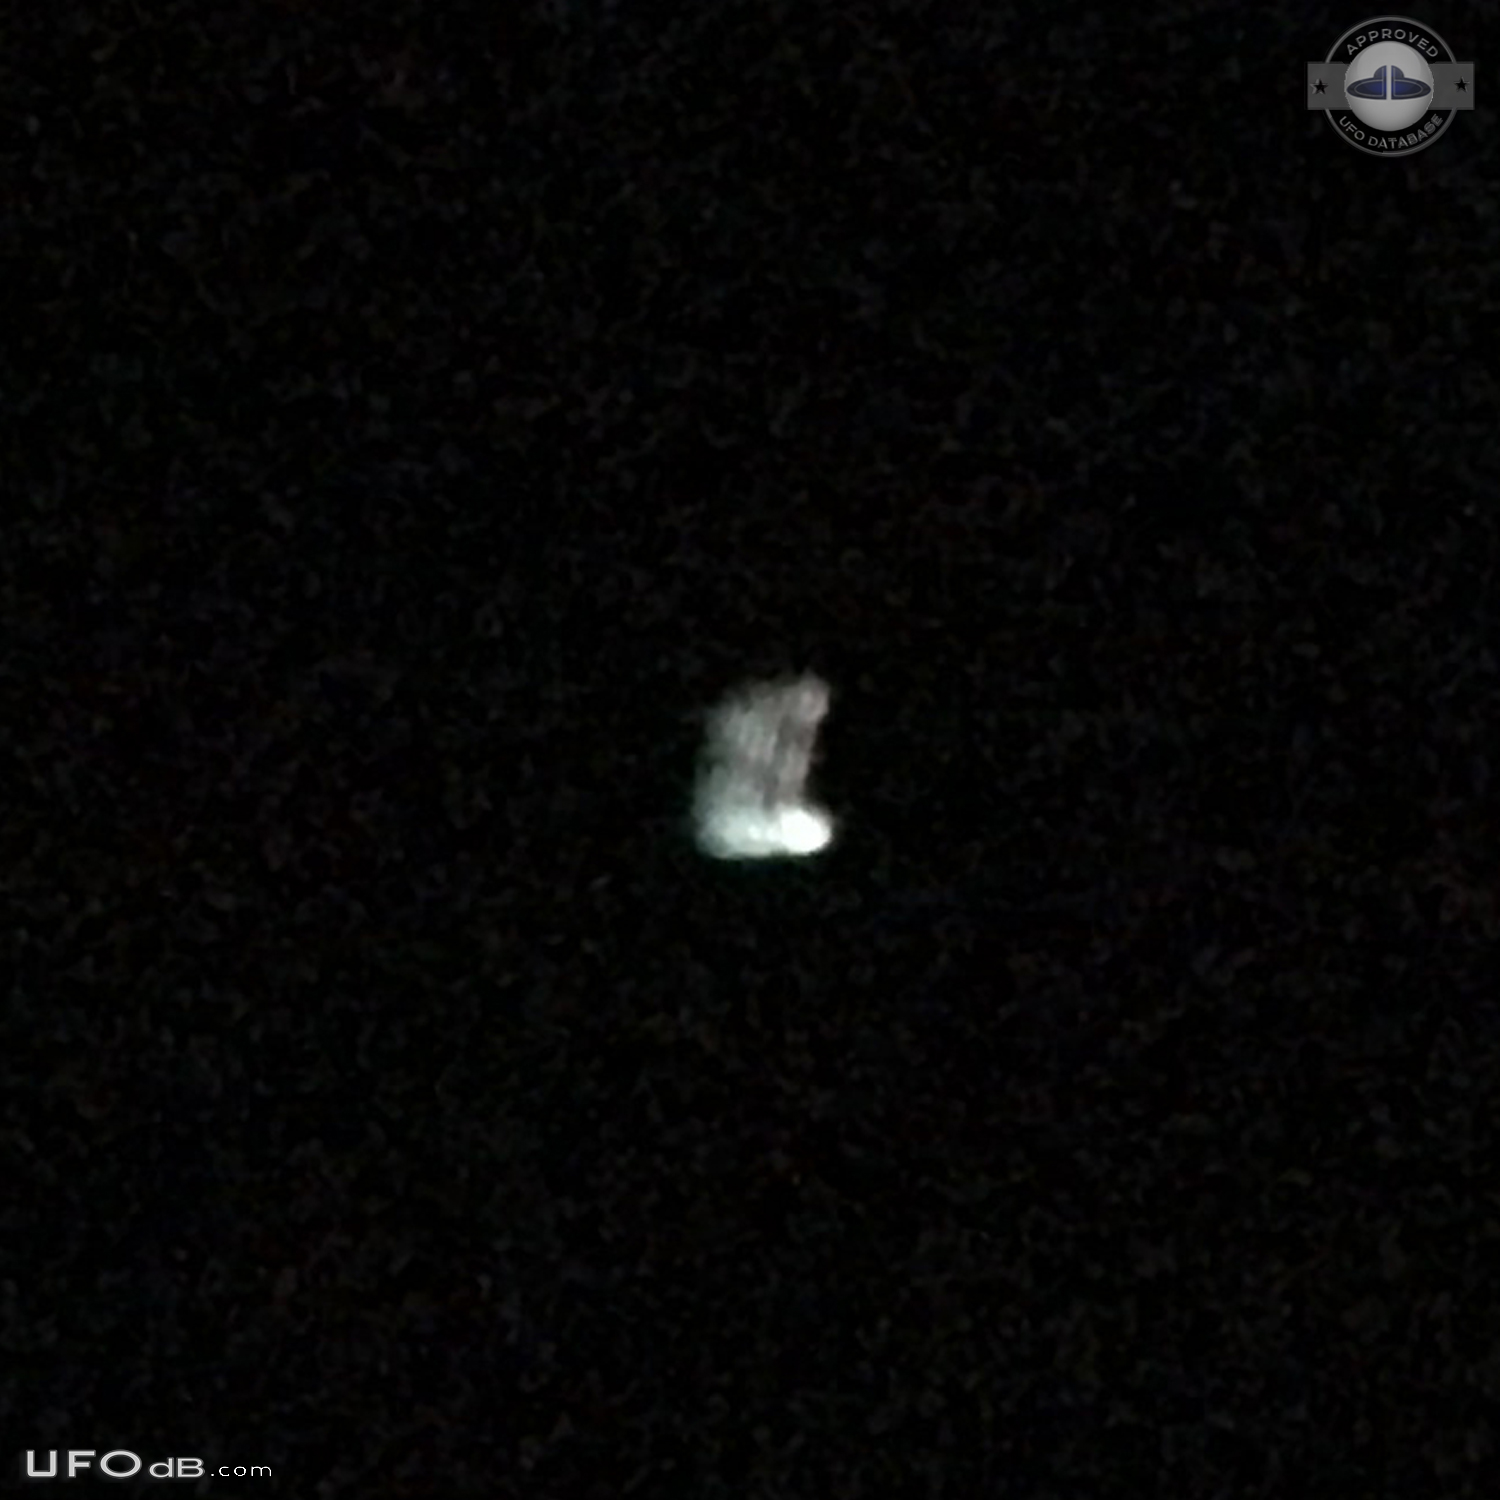 Driving home from ceremony saw strange UFO in the sky - Minnesota USA  UFO Picture #757-2